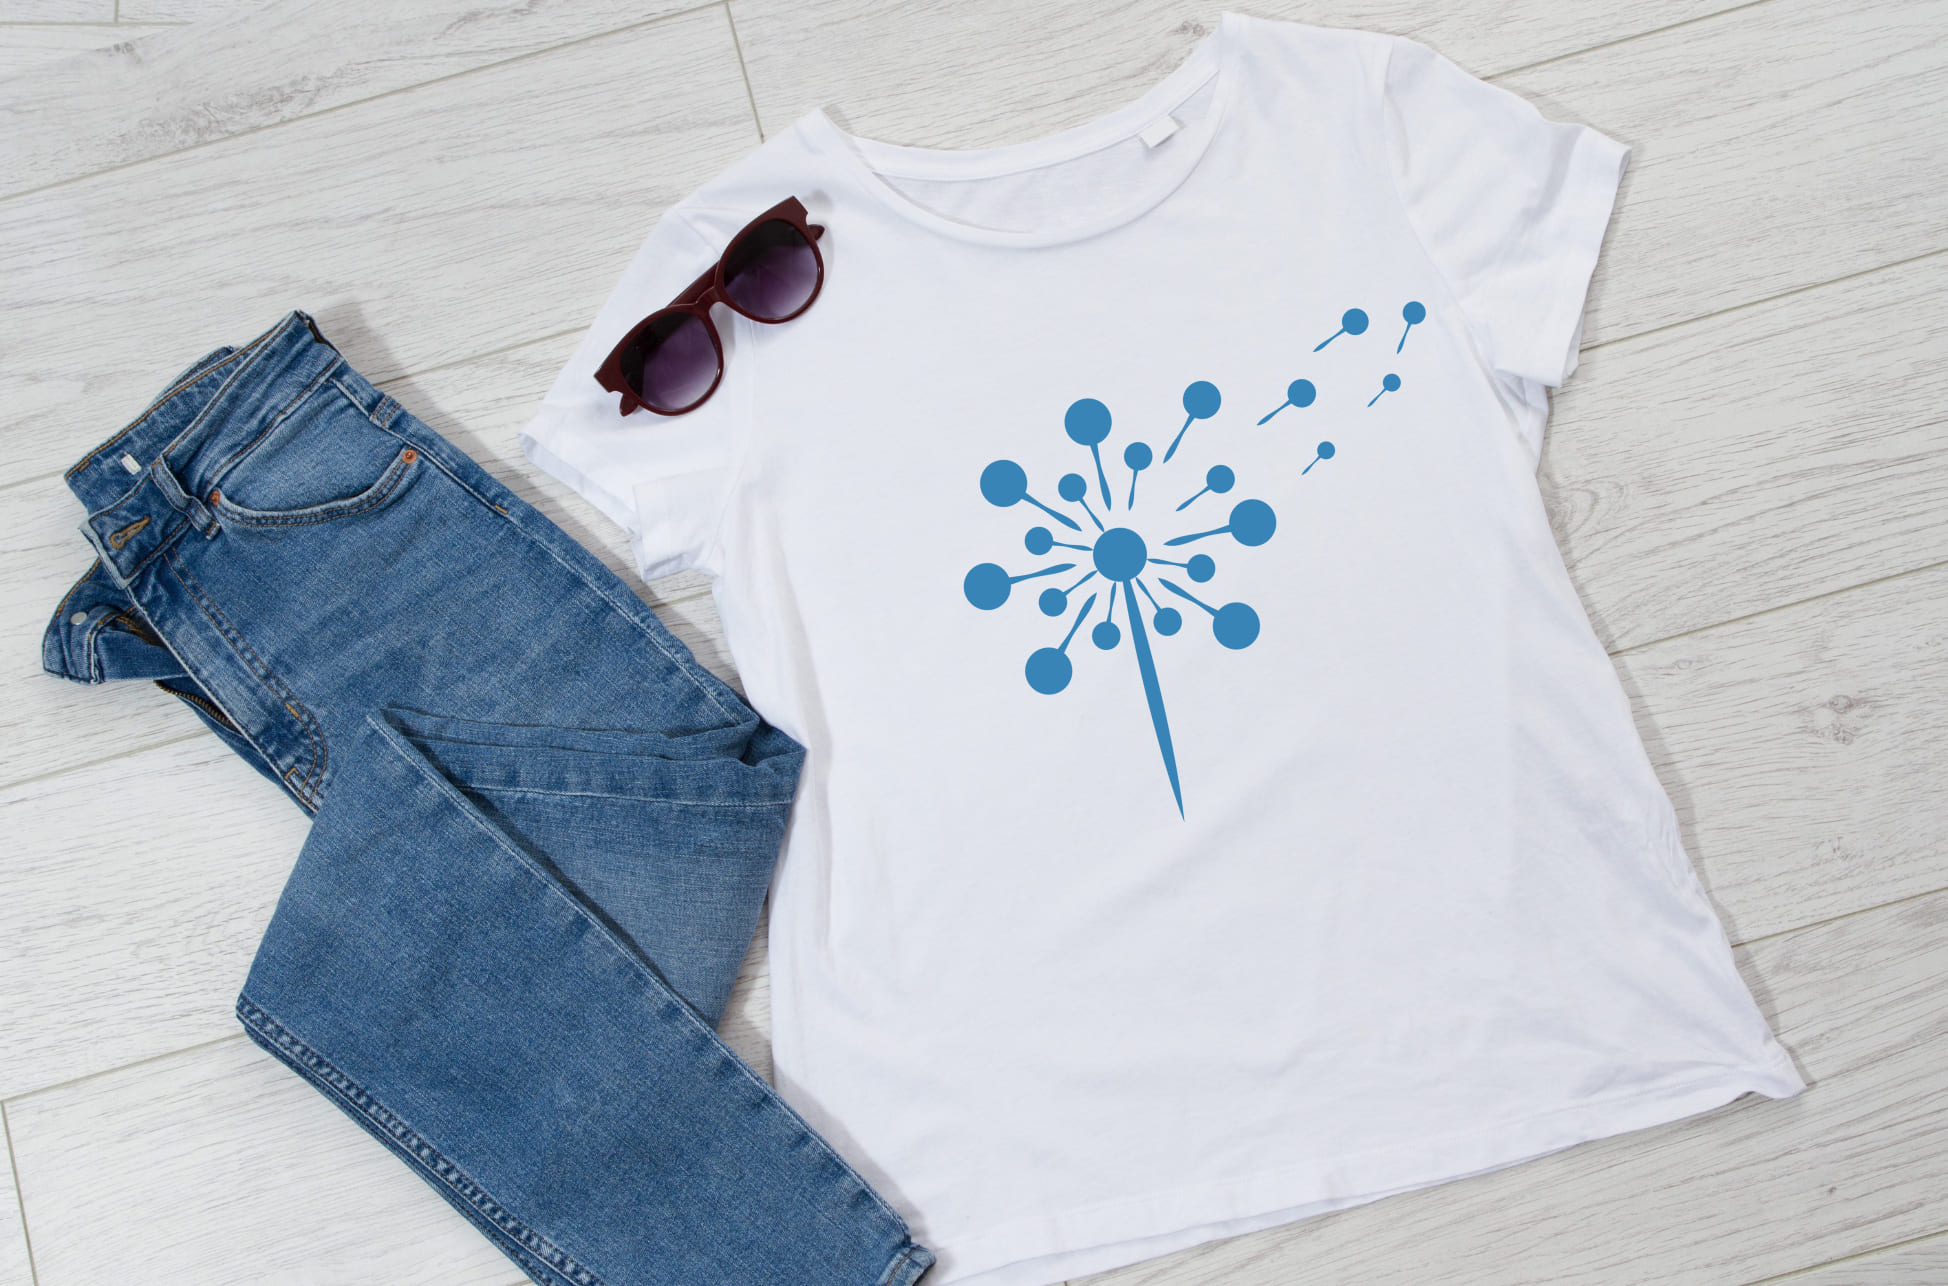 White T-shirt with blue dandelion flower and sunglasses with jeans.